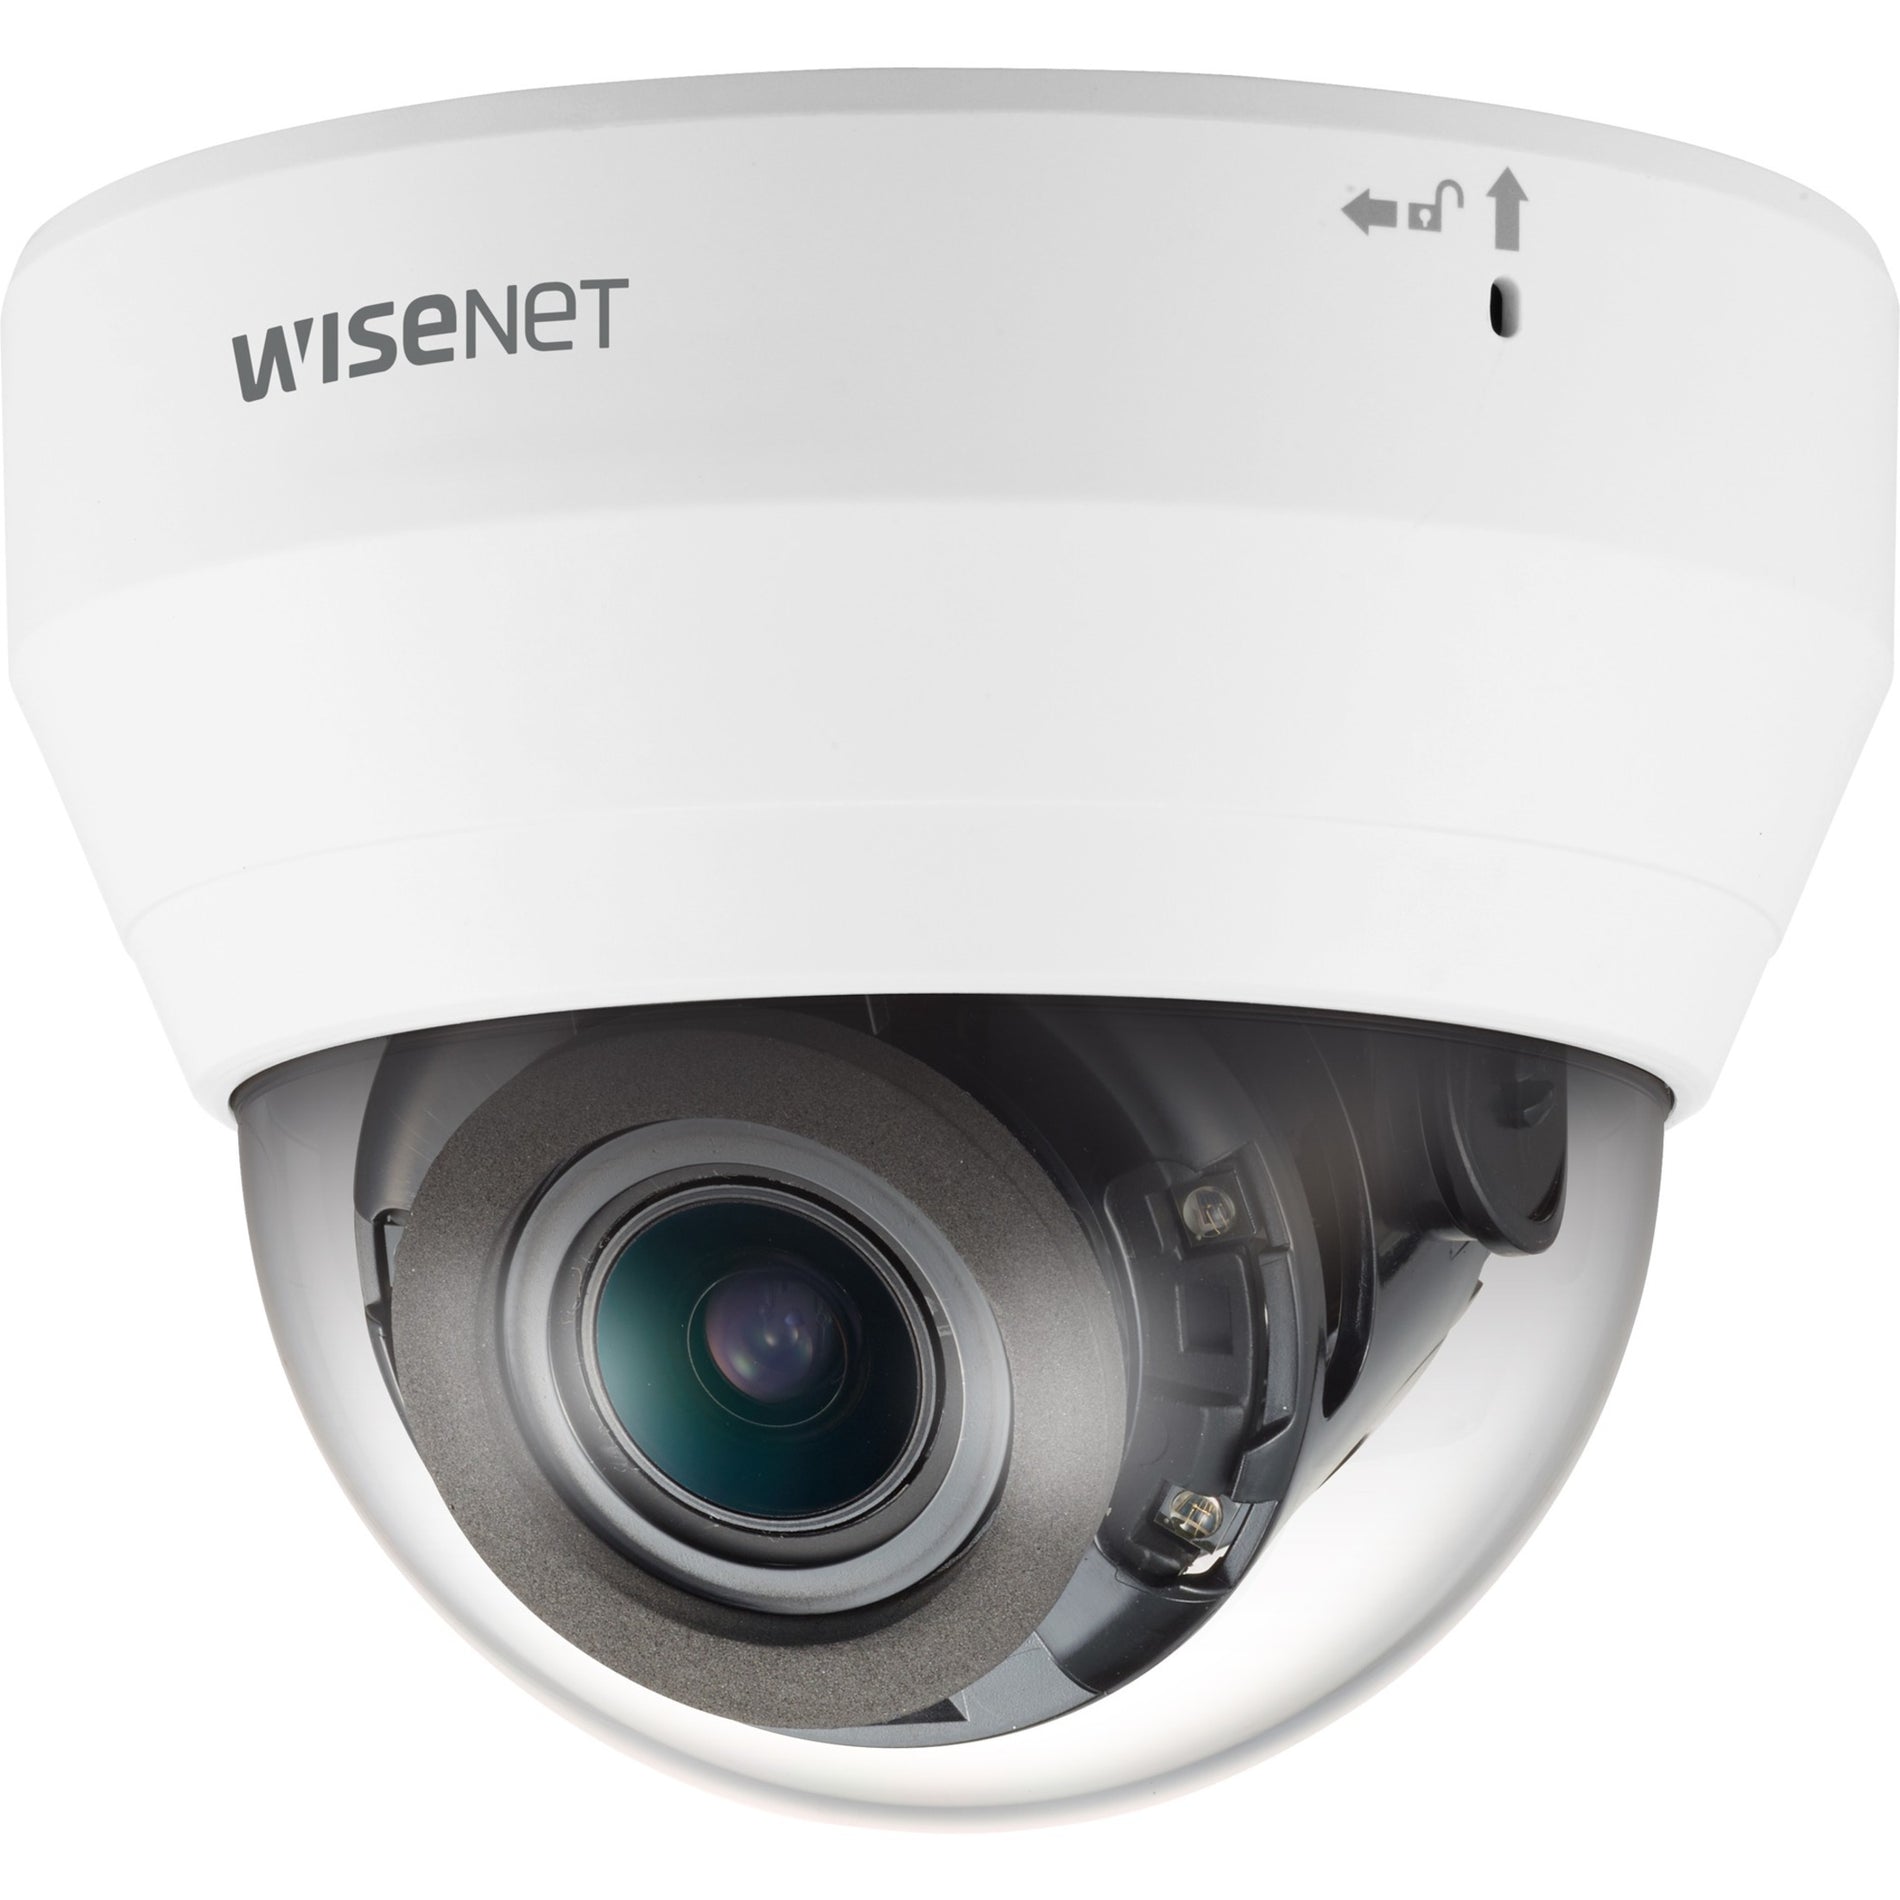 Wisenet QND-6082R1 2MP IR Indoor Dome, Full HD, Infrared Night Vision, Wide Dynamic Range, Motion Detection